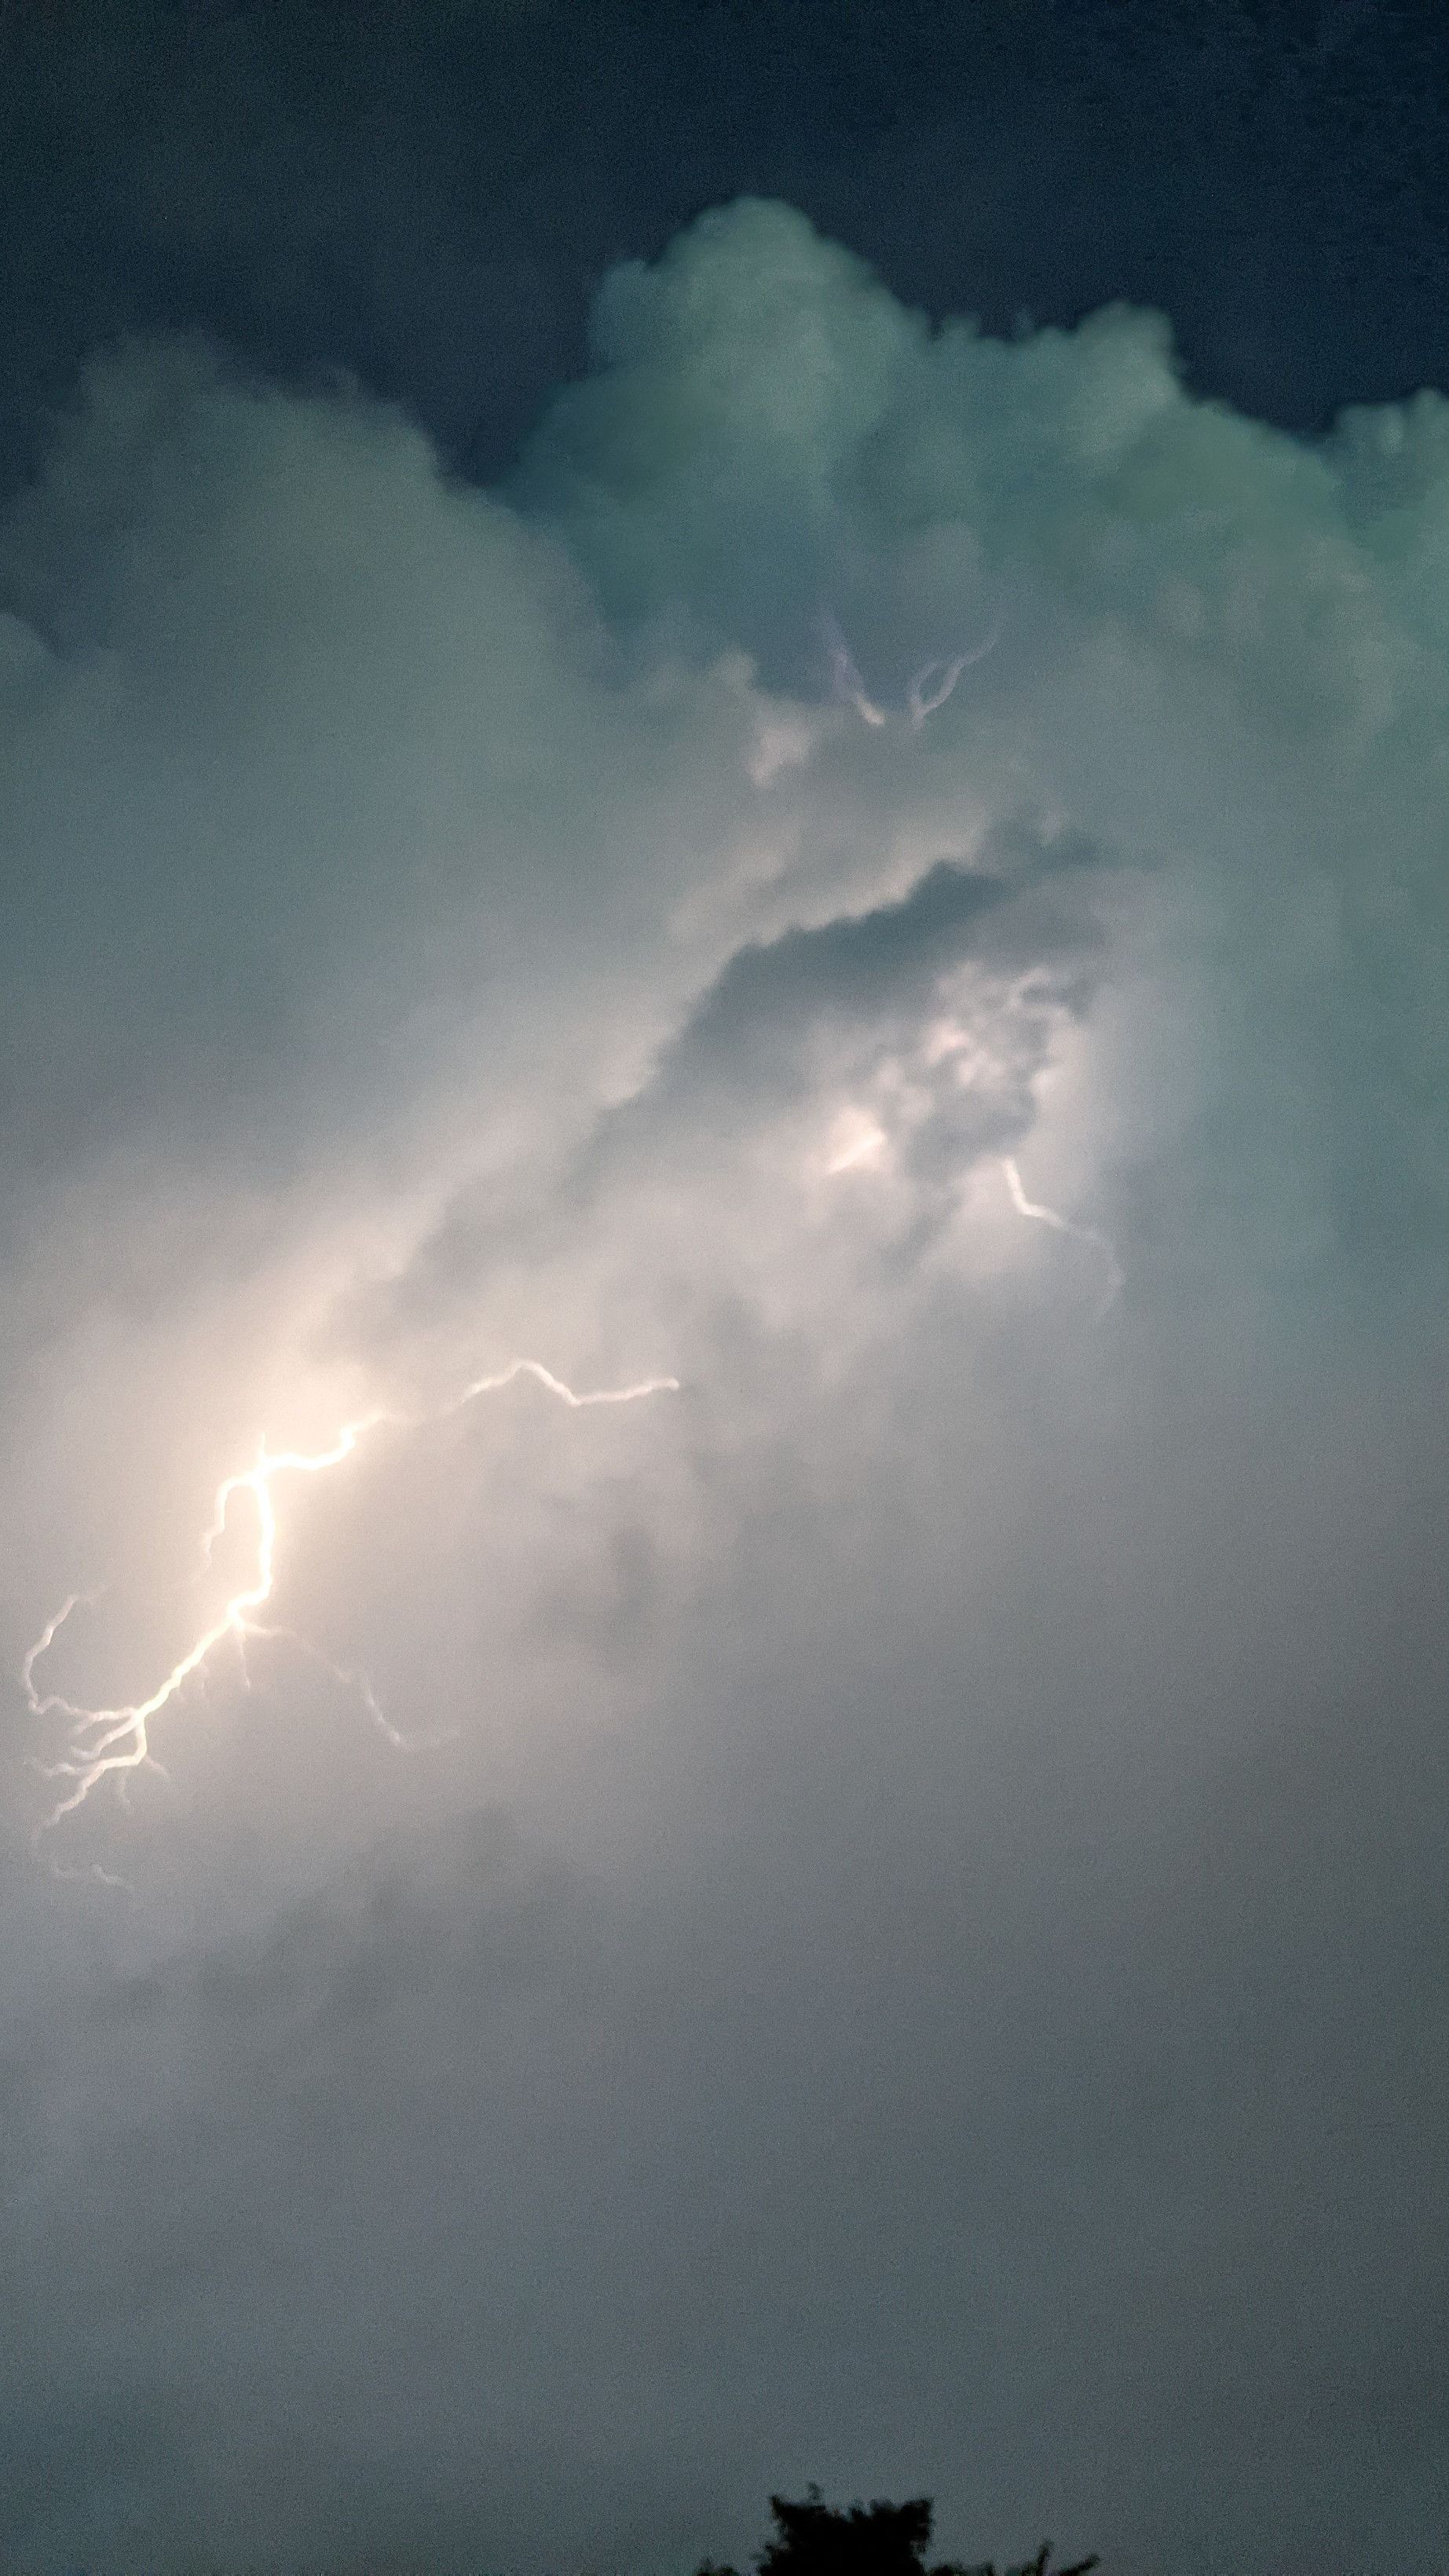 A lightning bolt strikes the sky in front of an airplane - Storm